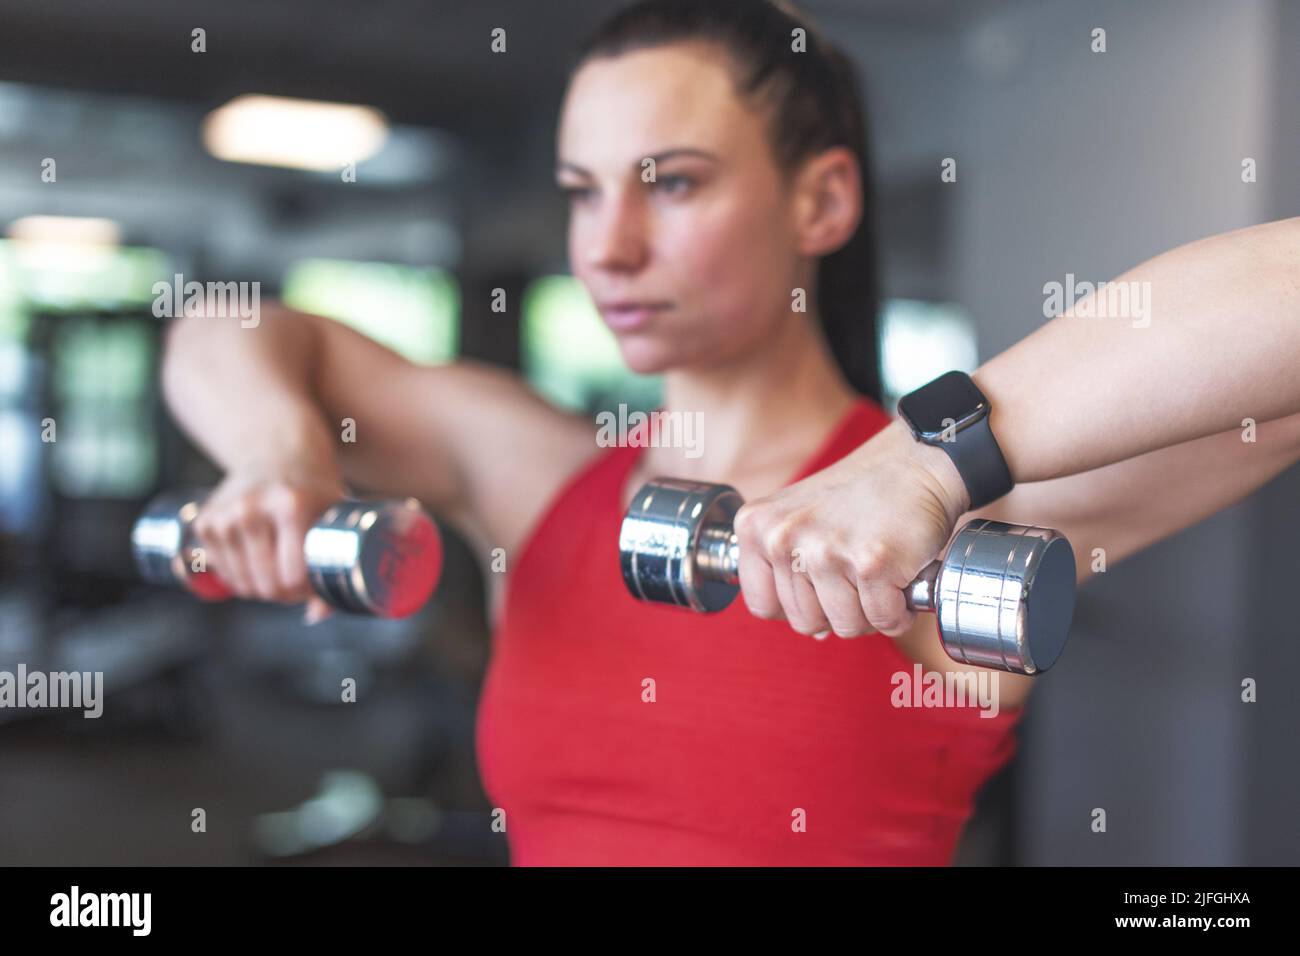 Young woman doing exercise with dumbbells portrait, depth of field Stock Photo